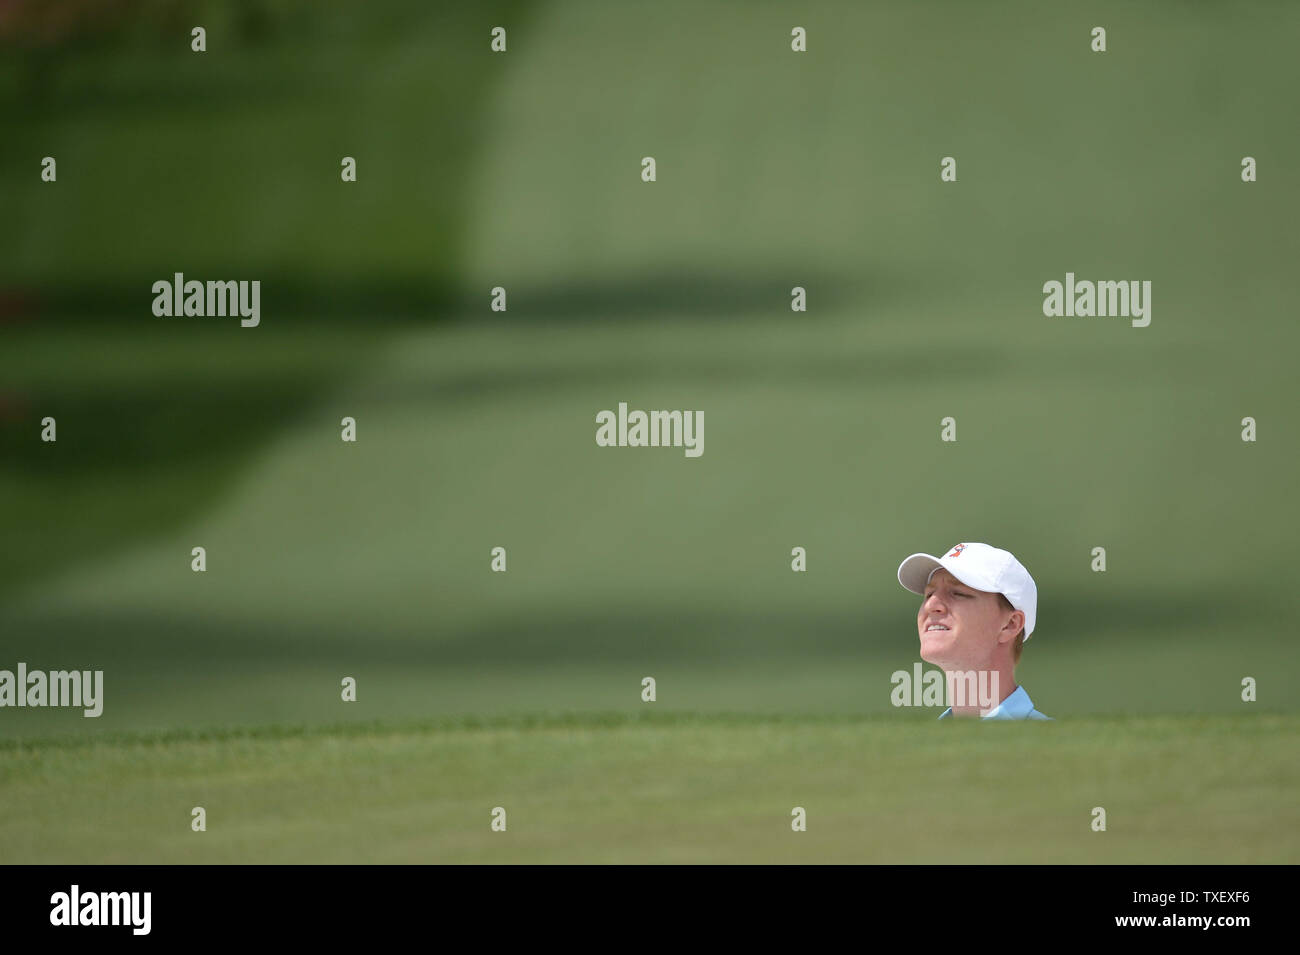 Jordan Niebrugge peers over a hill as he watches his ball roll on the seventh green during a practice round prior to the Masters golf tournament at Augusta National Golf Club in Augusta, George, April 8, 2014.  UPI/Kevin Dietsch Stock Photo